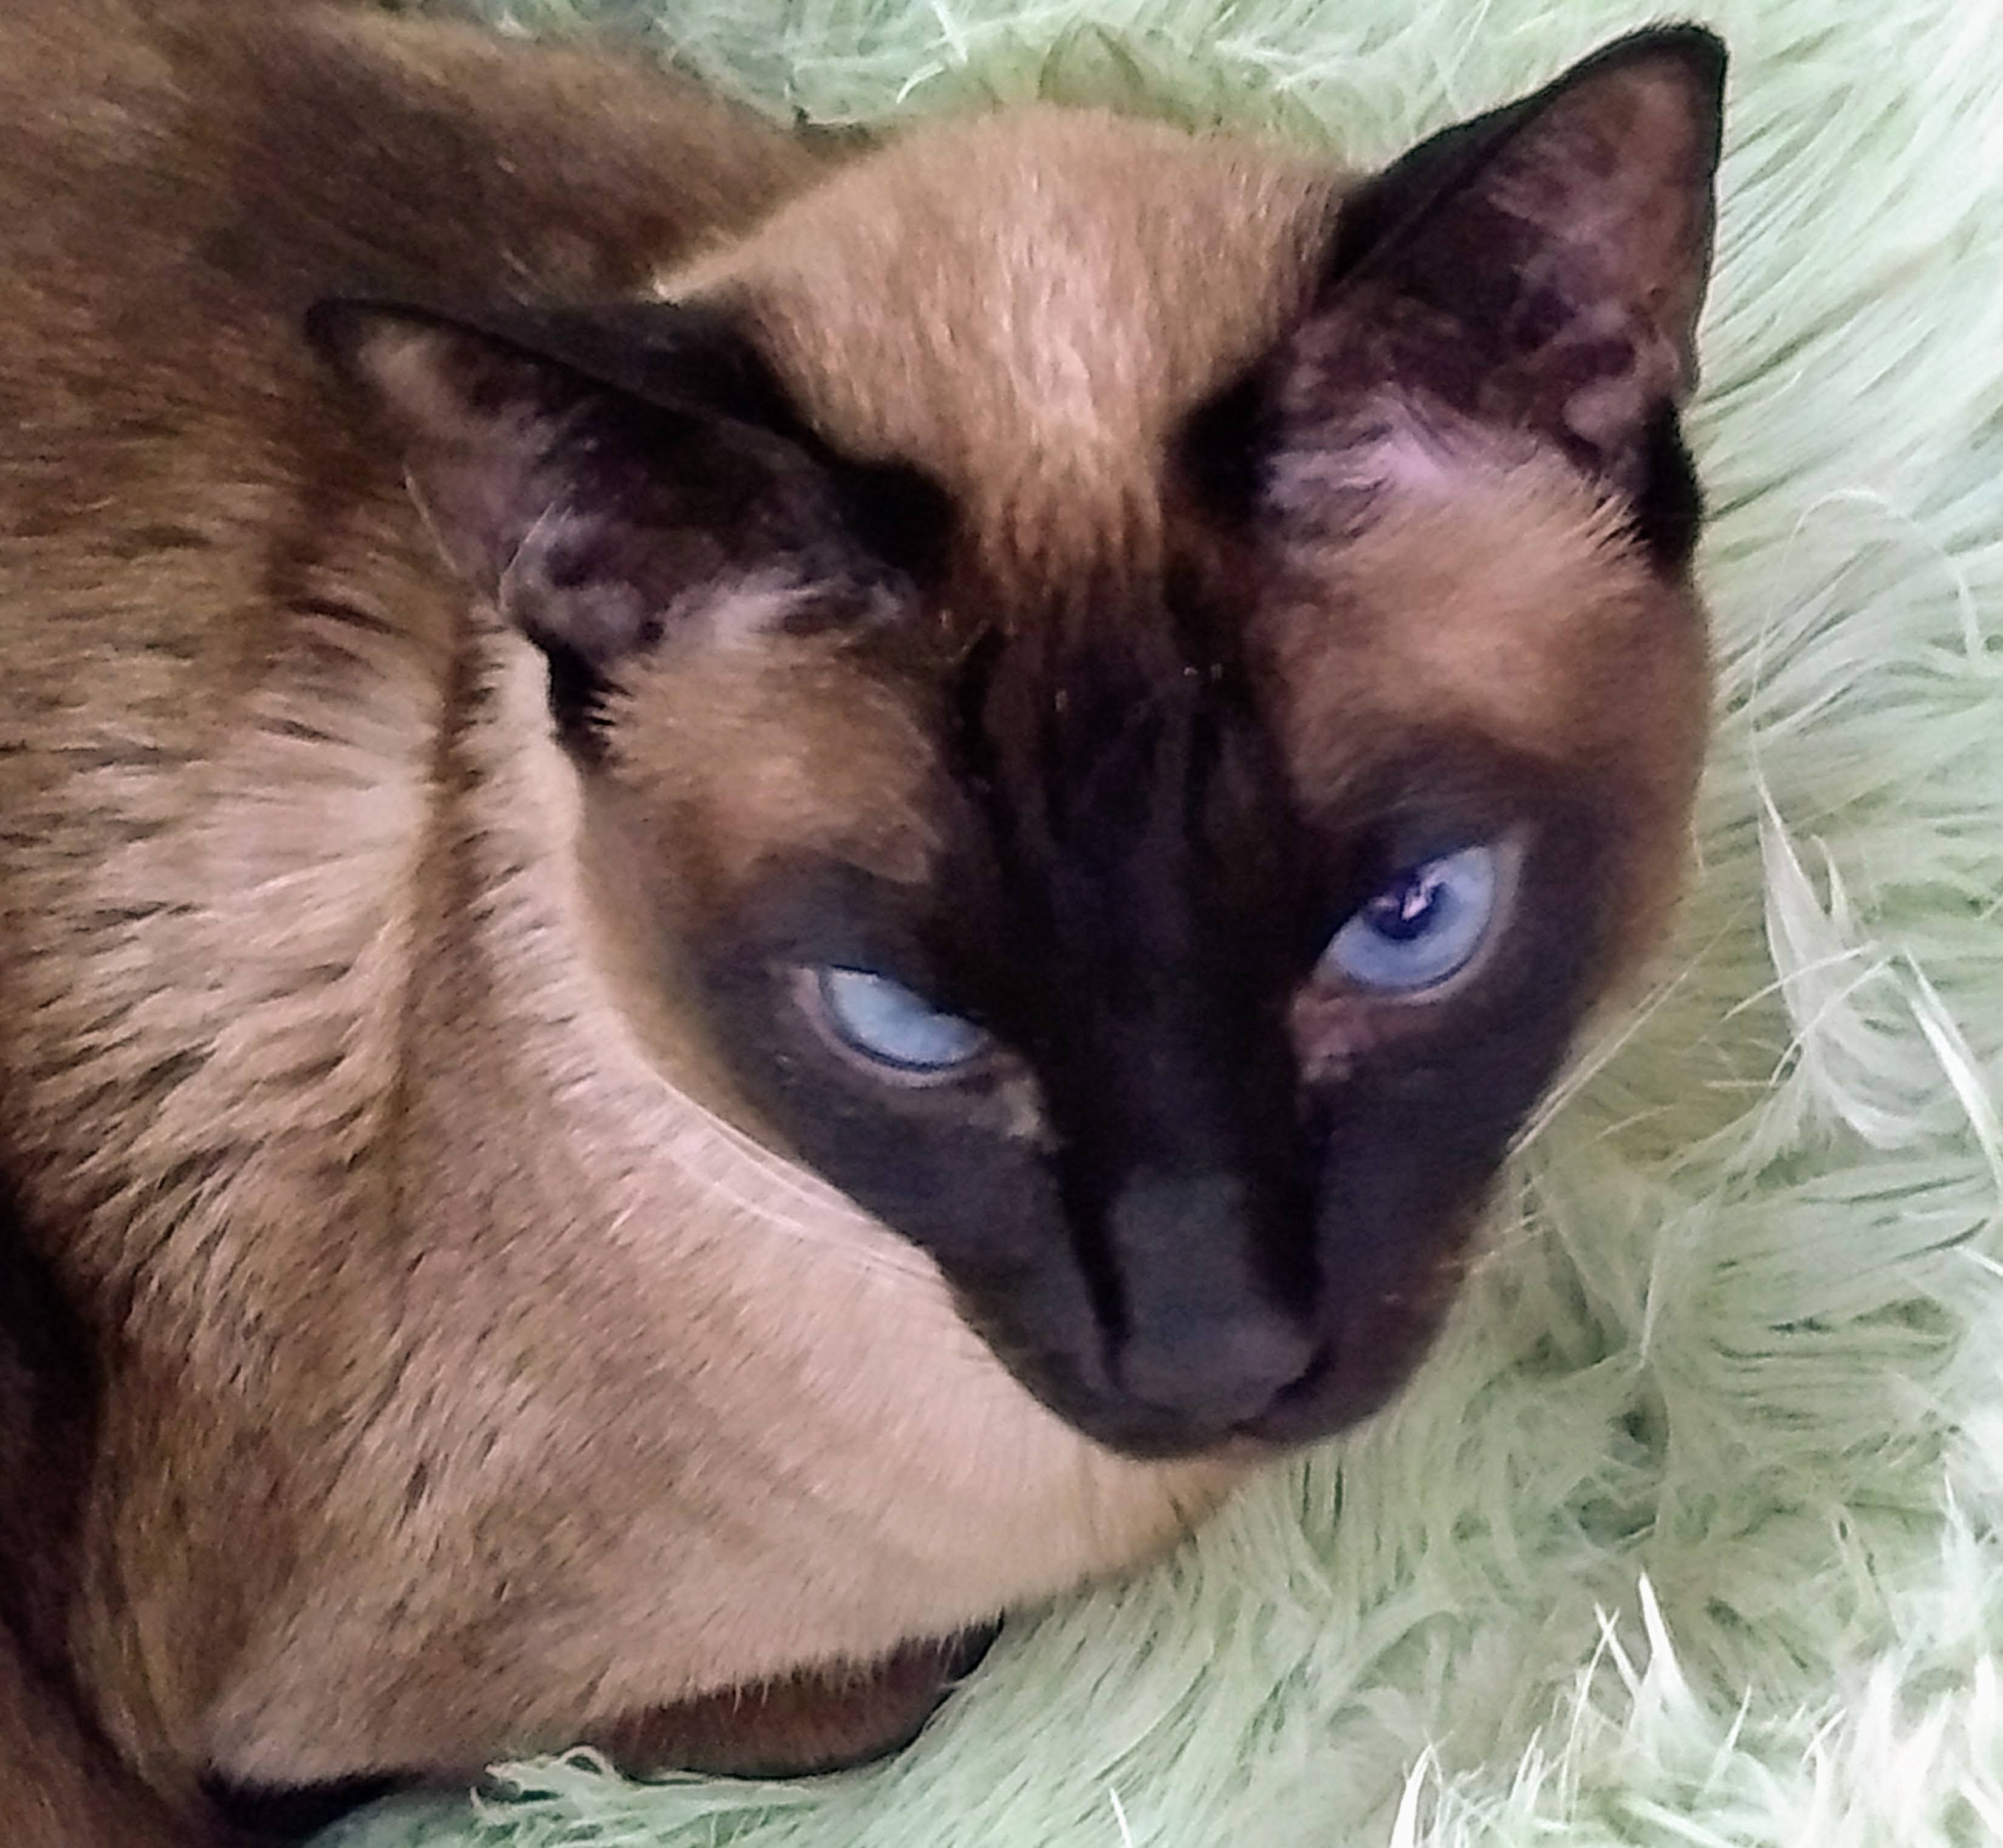 Neko The Siamese Cat Keeps His Family Entertained Send Us Your Pet Rescue Stories Cleveland Com